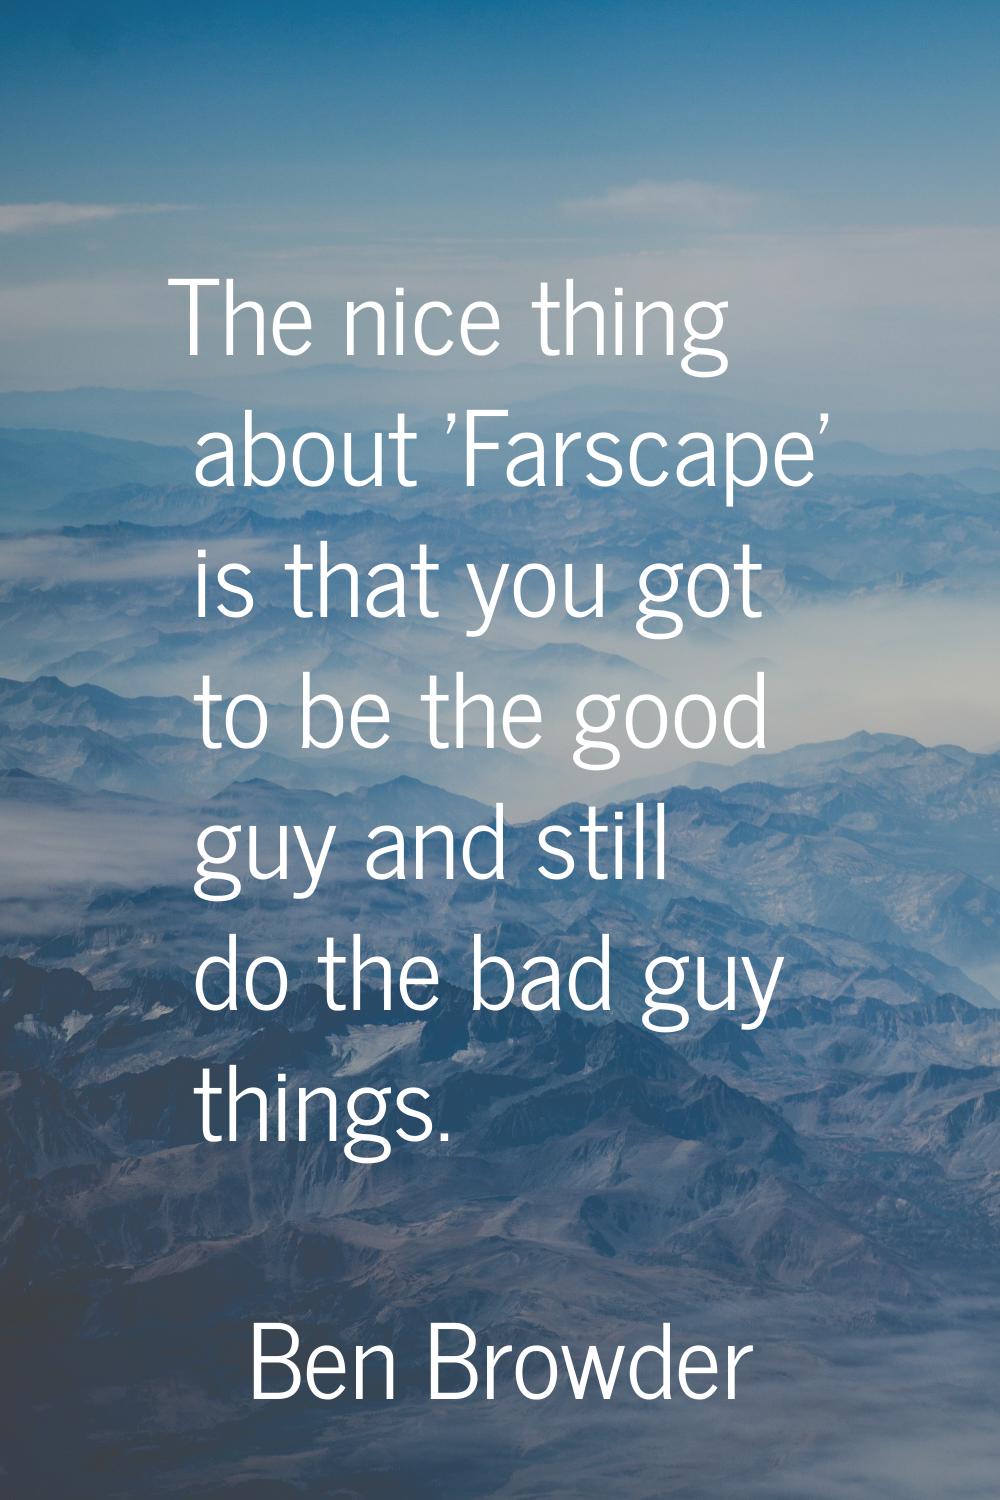 The nice thing about 'Farscape' is that you got to be the good guy and still do the bad guy things.